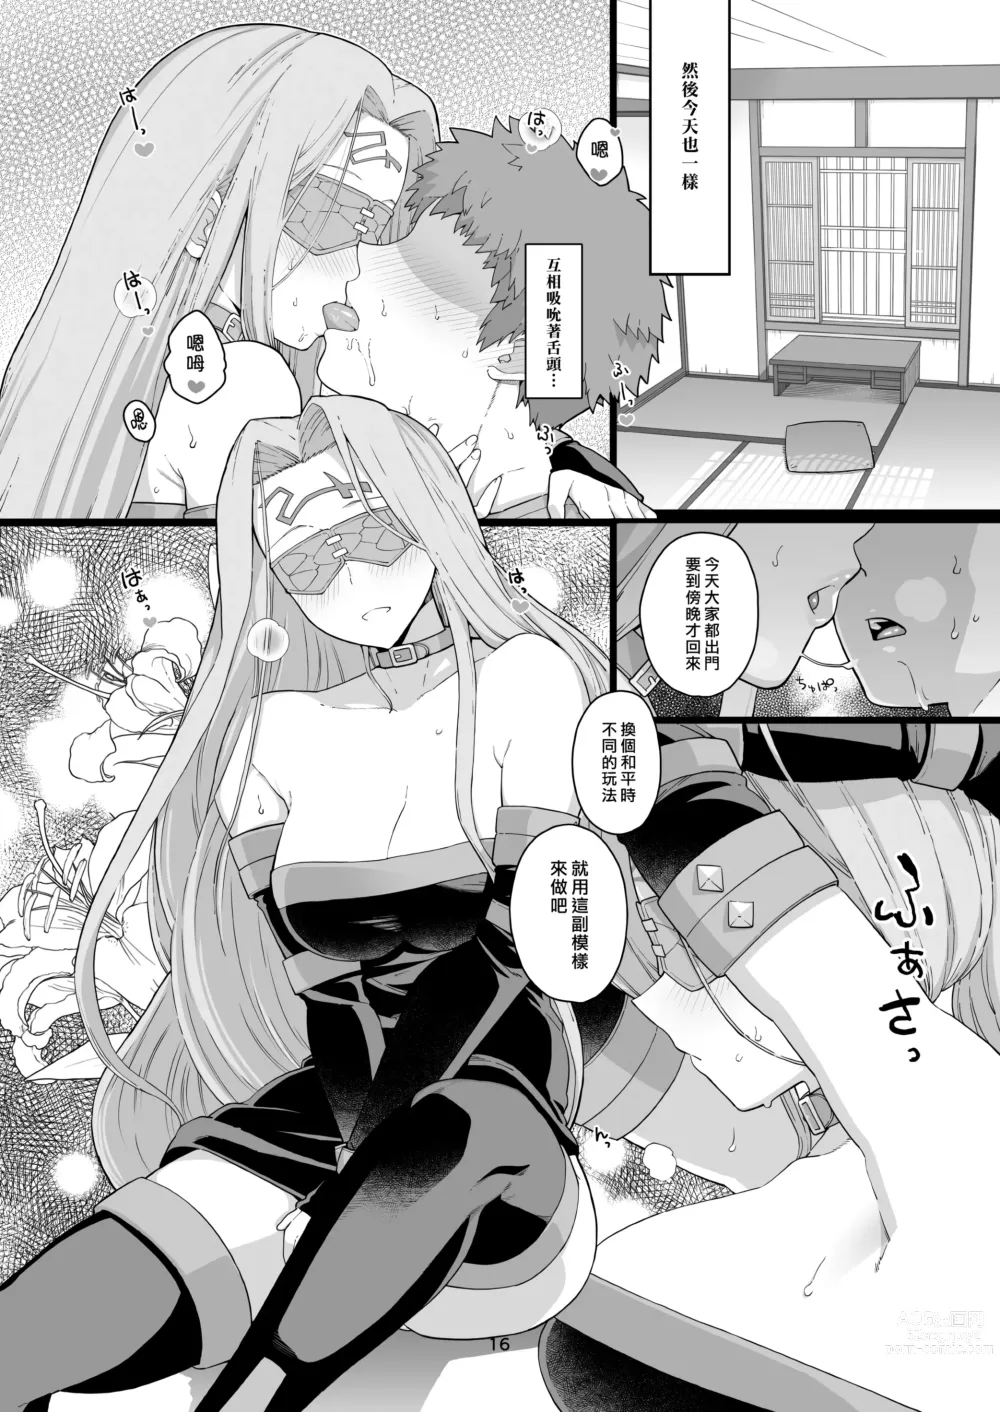 Page 19 of doujinshi Rider小姐的偷吃 (decensored)